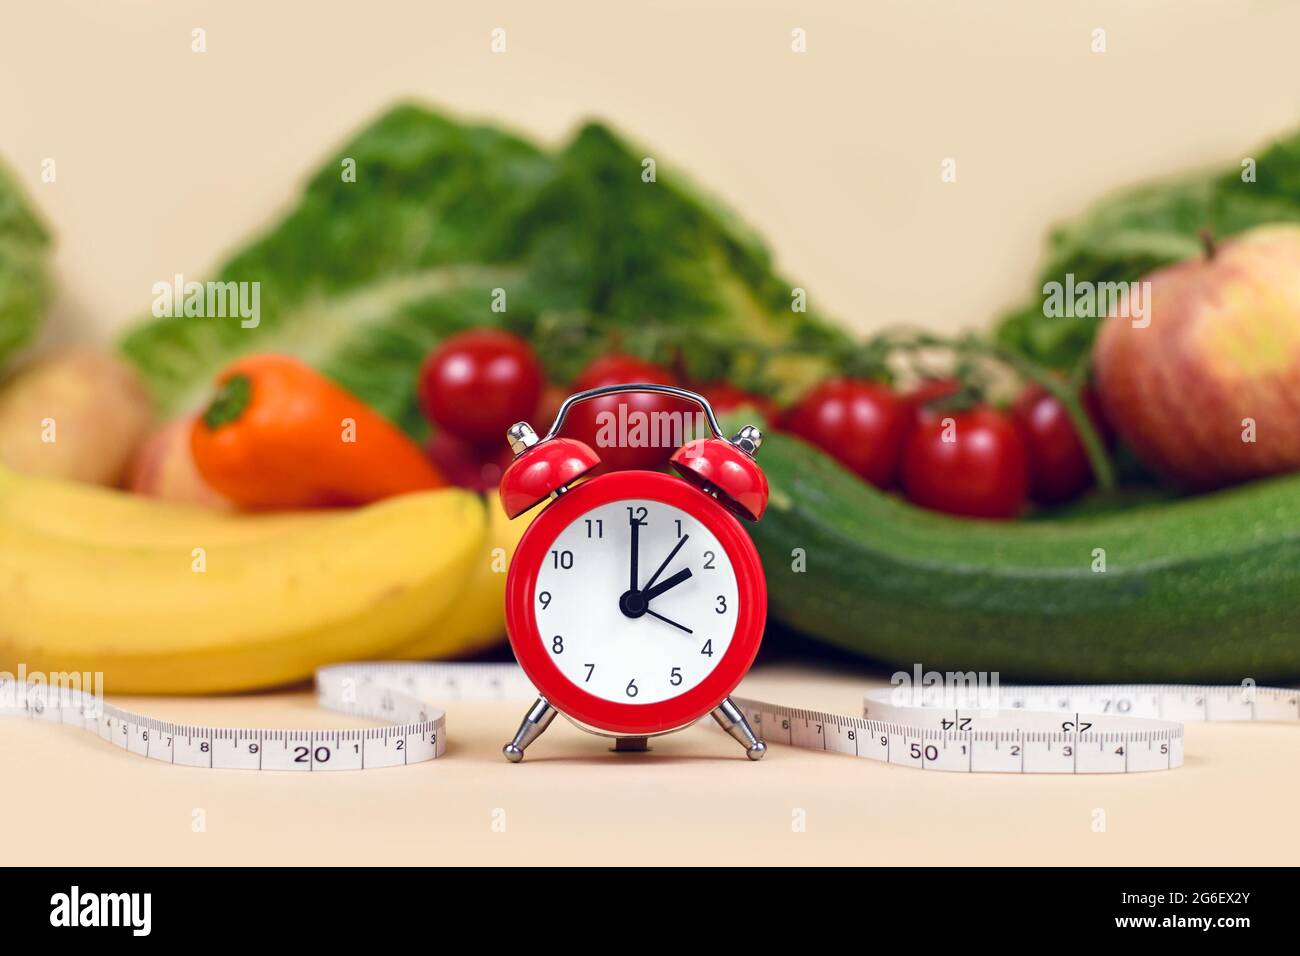 Concept for loosing weight with only eating healthy food at certain times with vegetables, fruits, measuring tape and clock Stock Photo